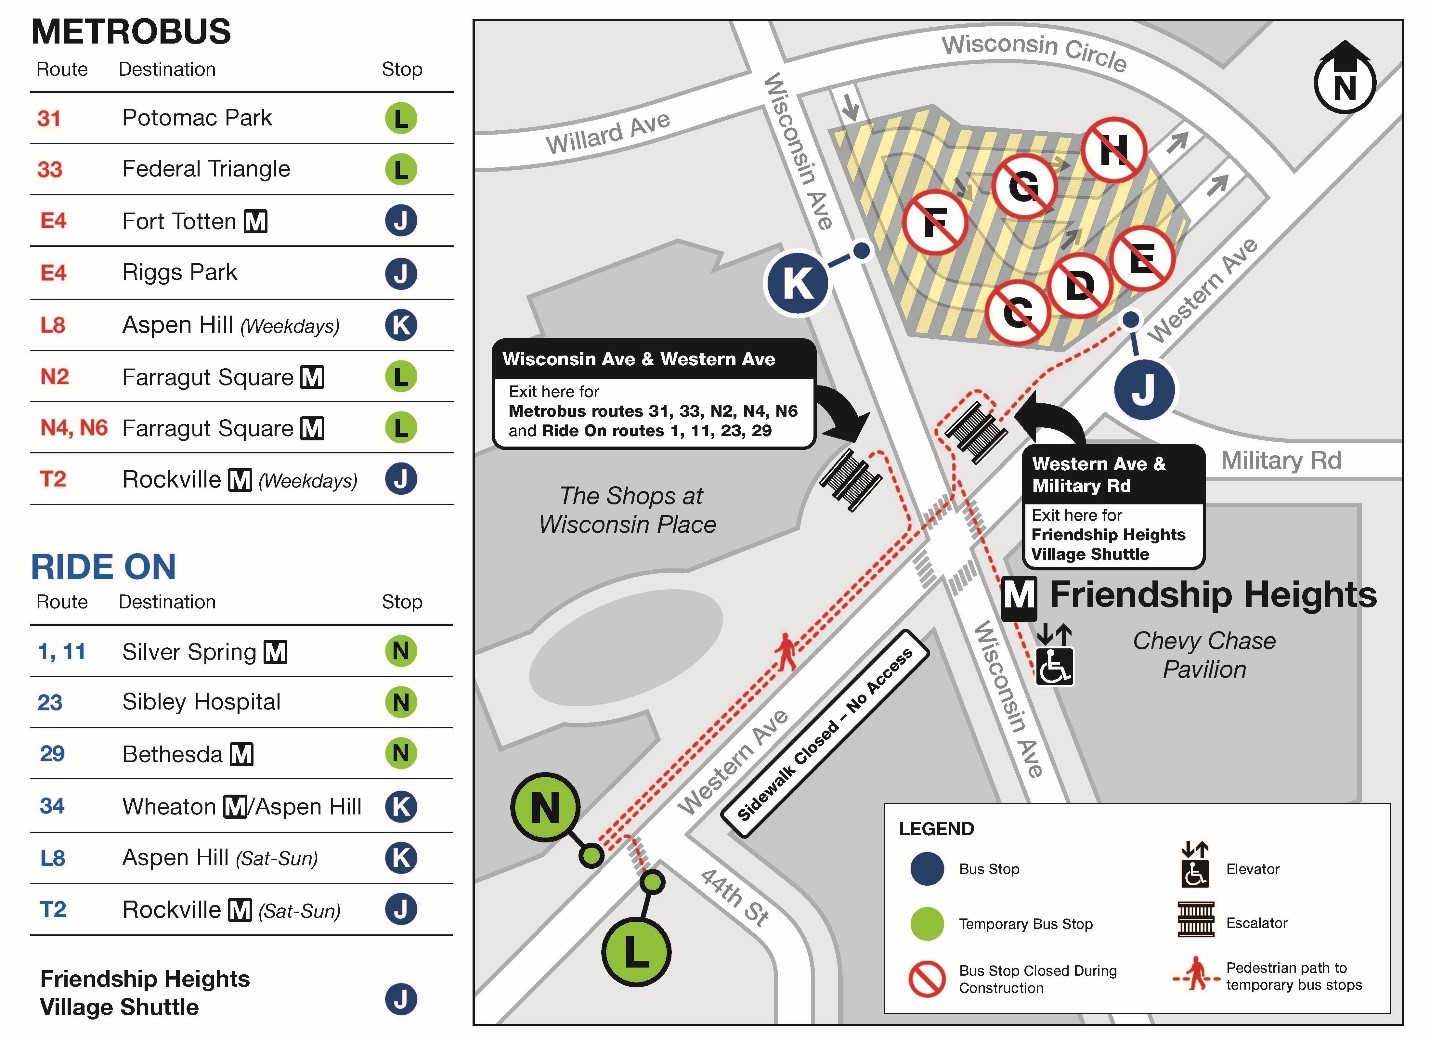 Bus Service and Temporary Boarding Locations